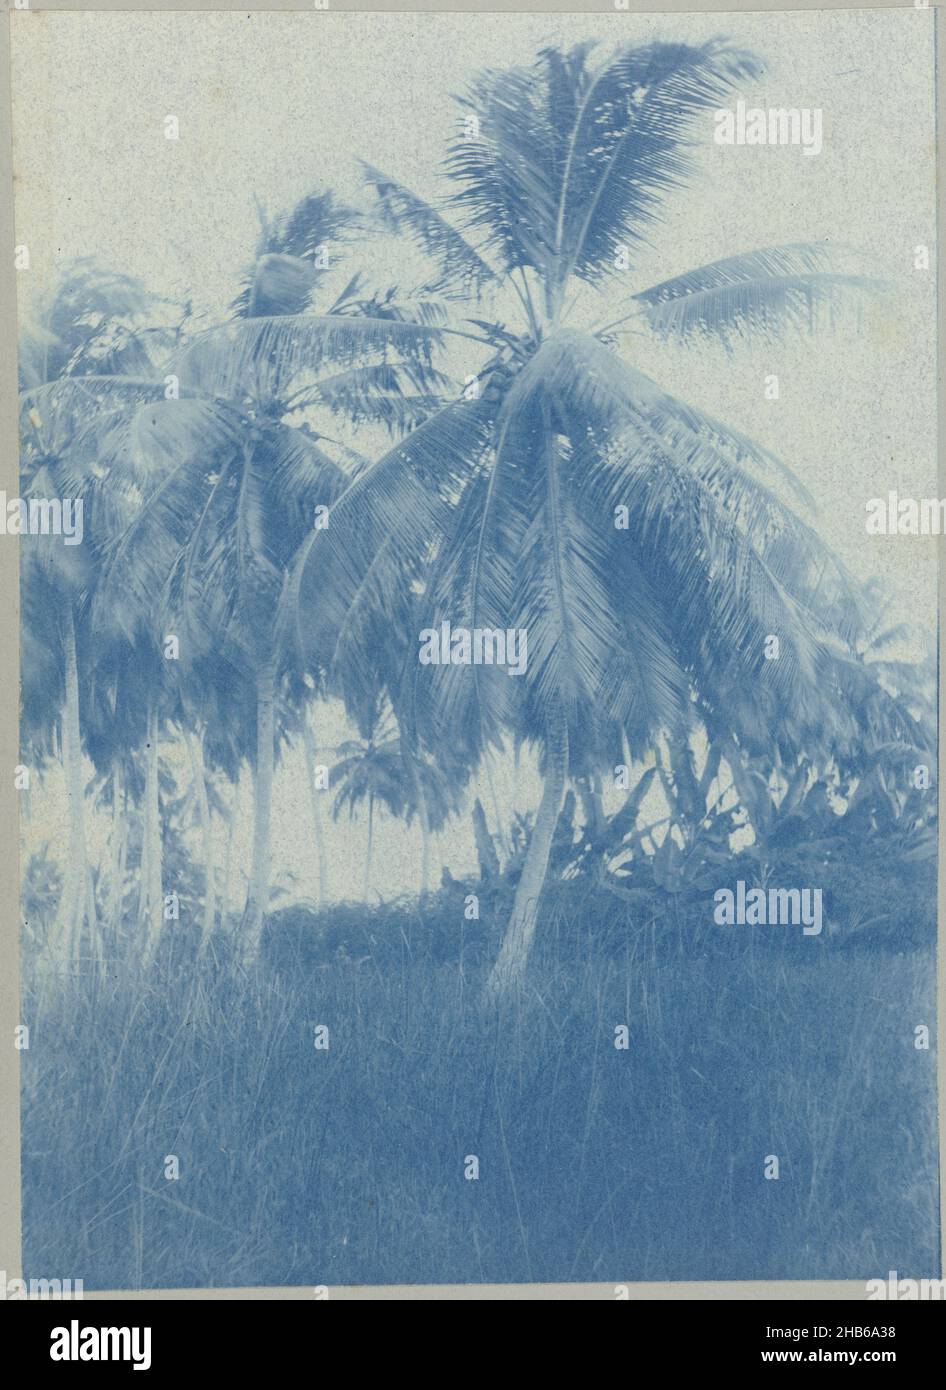 Coronie (title on object), Coconut trees at Coronie. Part of the photo album Souvenir de Voyage (part 2), about the life of the Doijer family in and around the plantation Ma Retraite in Suriname in the years 1906-1913., Hendrik Doijer (attributed to), Suriname, 1906 - 1913, photographic support, cyanotype, height 169 mm × width 121 mm Stock Photo